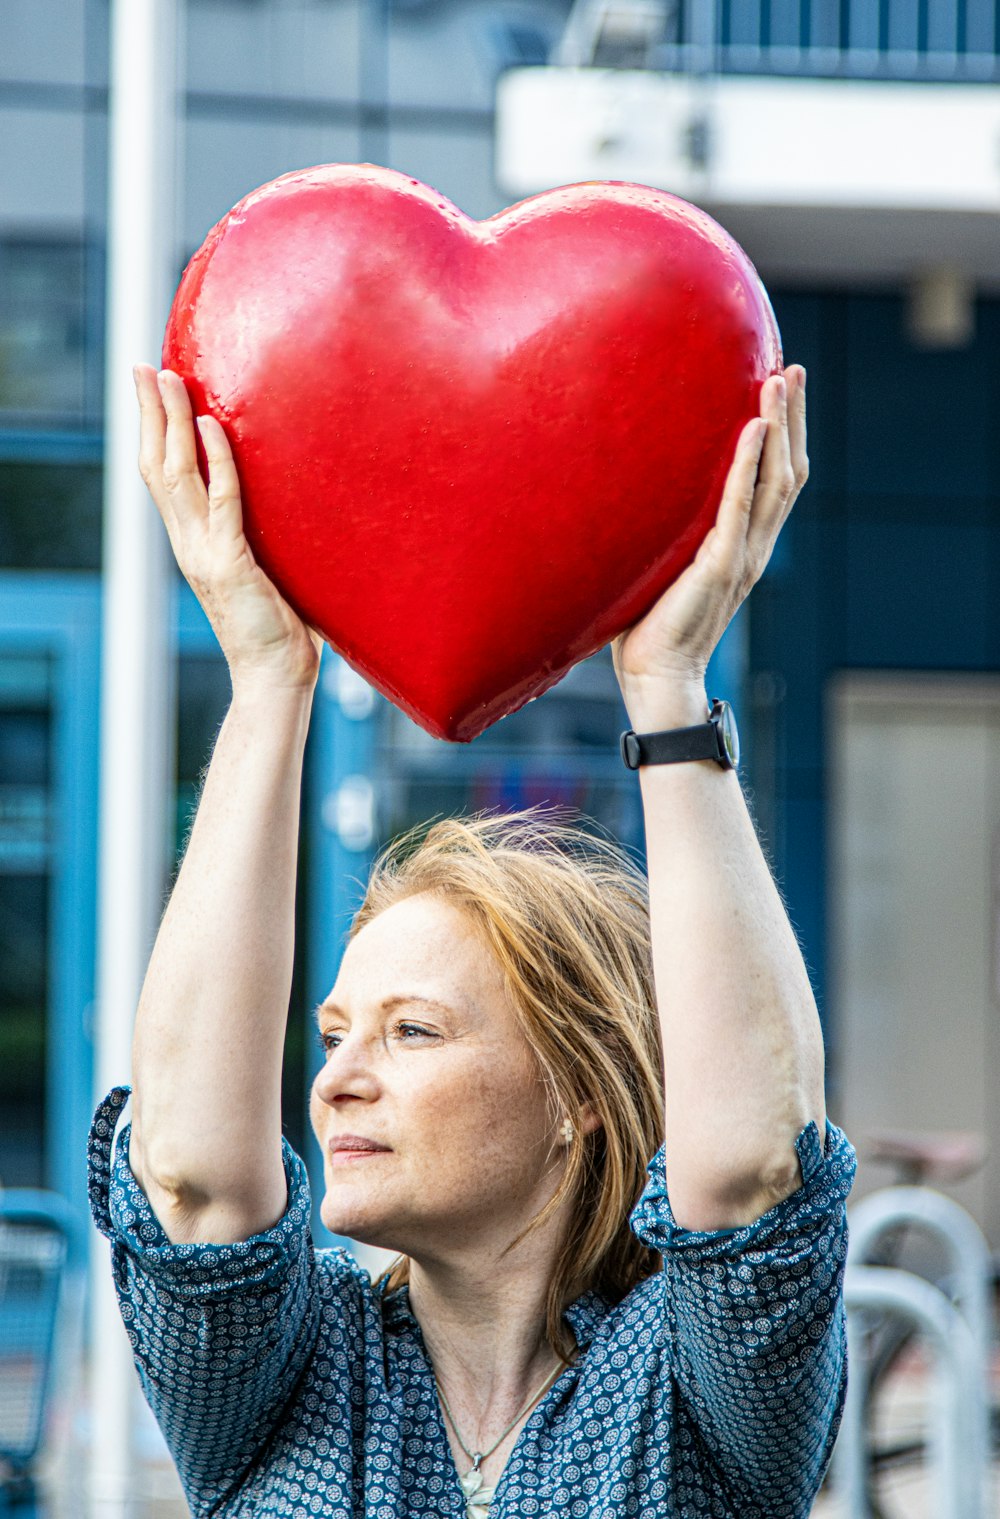 a woman holding a red heart shaped object